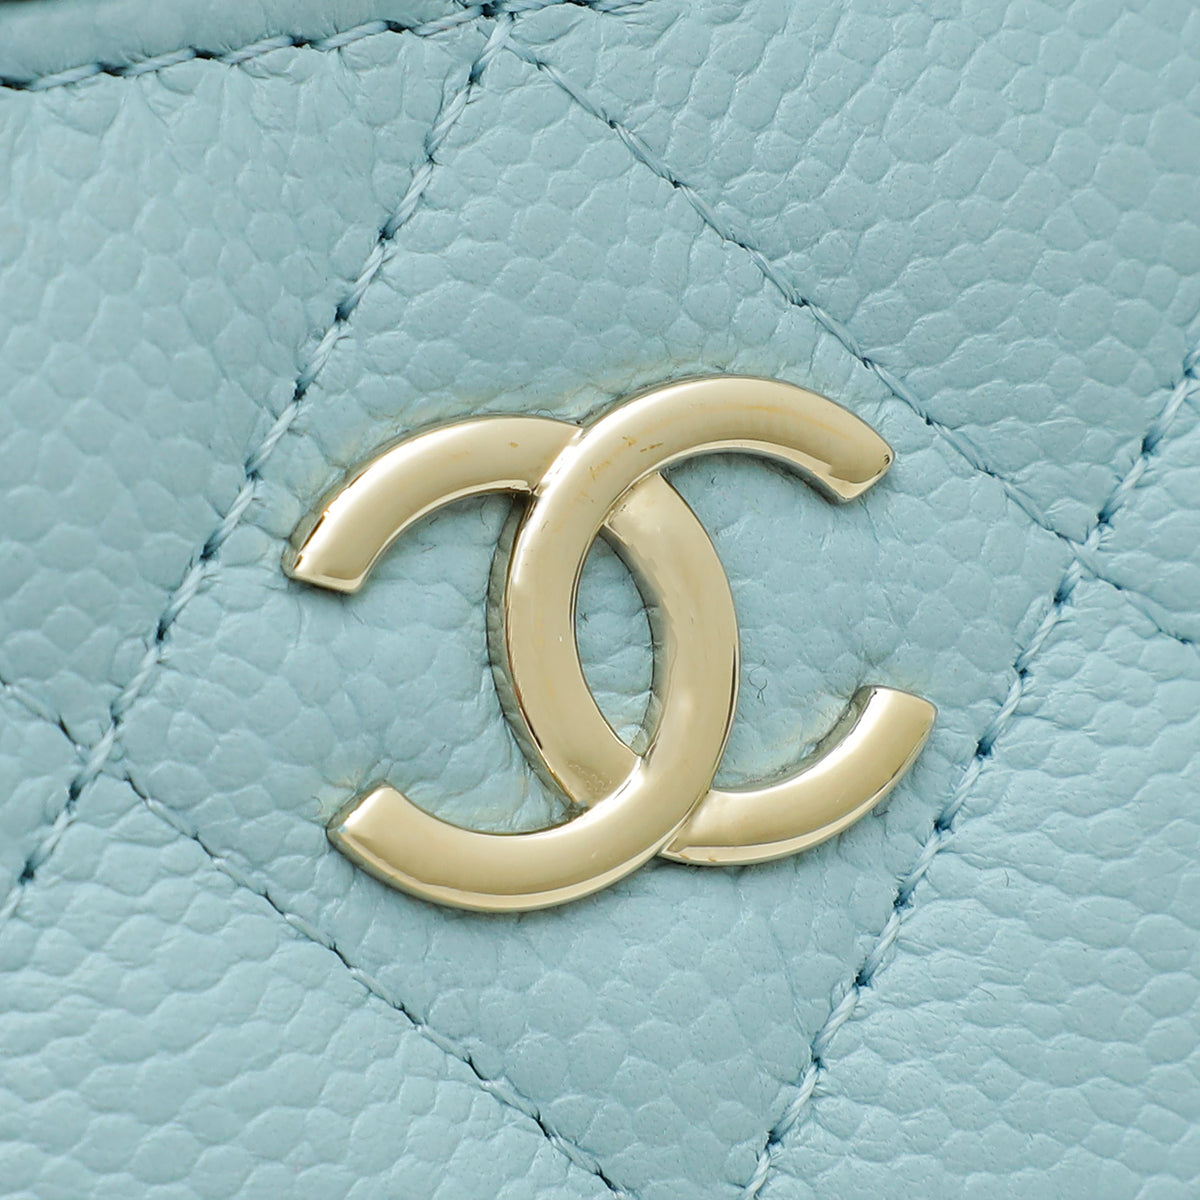 Chanel Sky Blue CC Links Mini Vanity Case With Chain